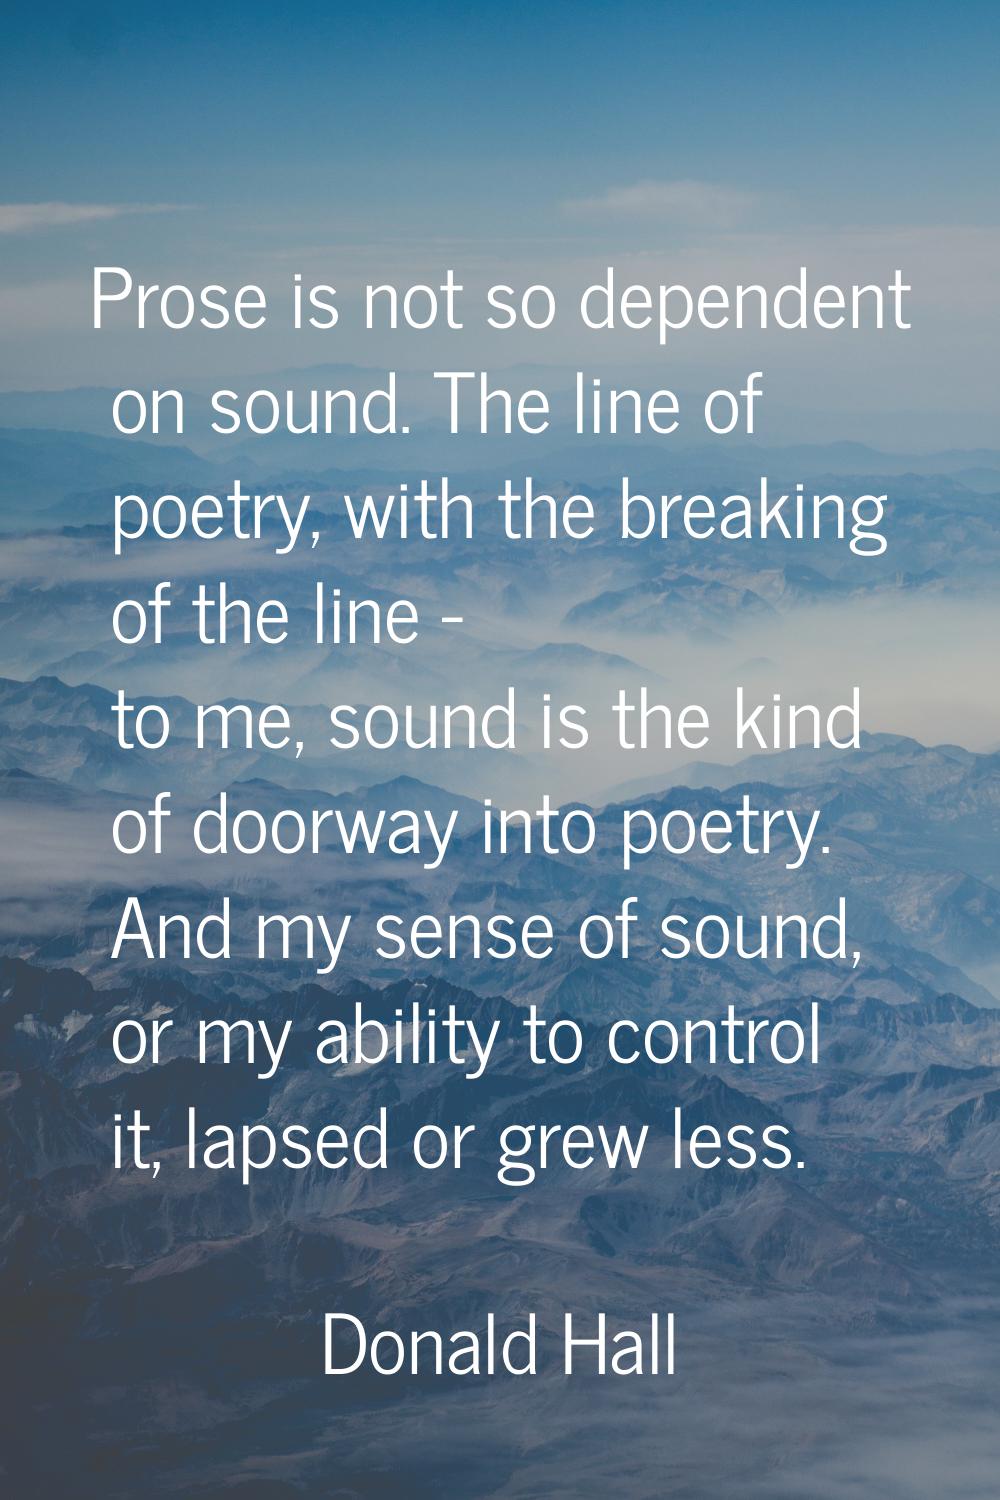 Prose is not so dependent on sound. The line of poetry, with the breaking of the line - to me, soun